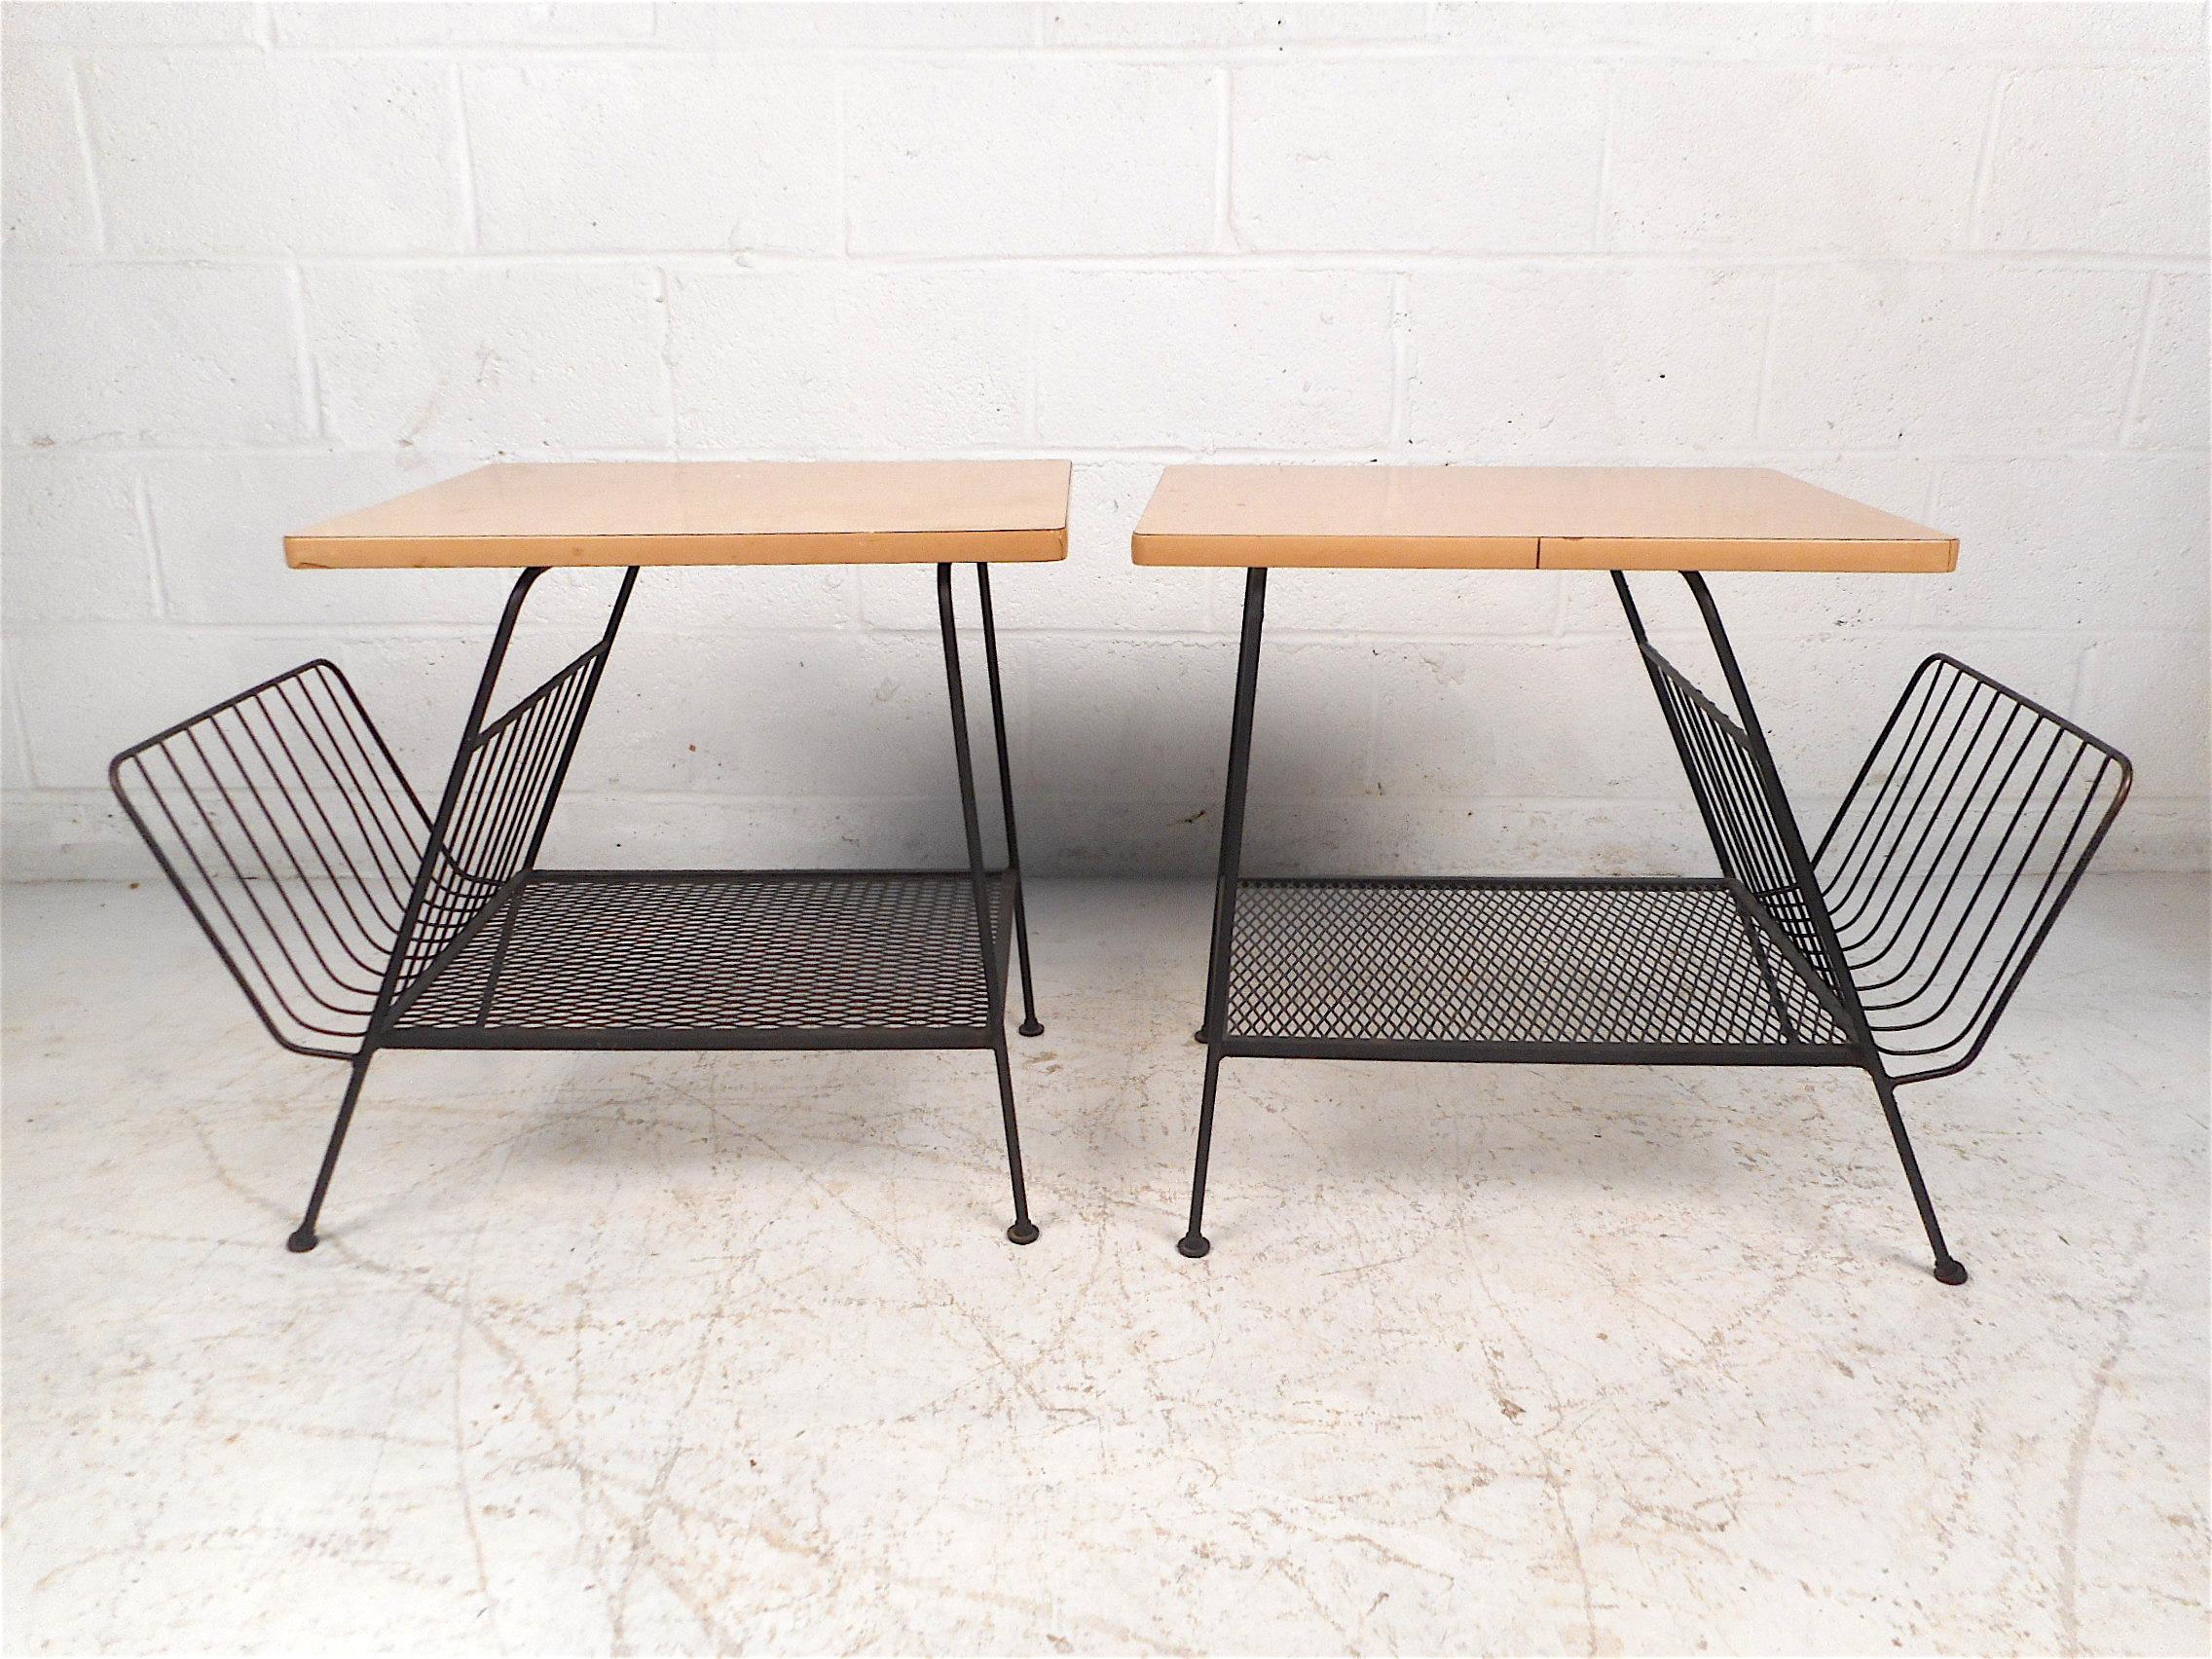 Interesting pair of side tables with magazine racks attached, in the style of Paul McCobb. These petite end tables have laminate table surfaces with a mock wood-grain pattern, the frame is constituted of iron with a black finish. Stylish pair sure